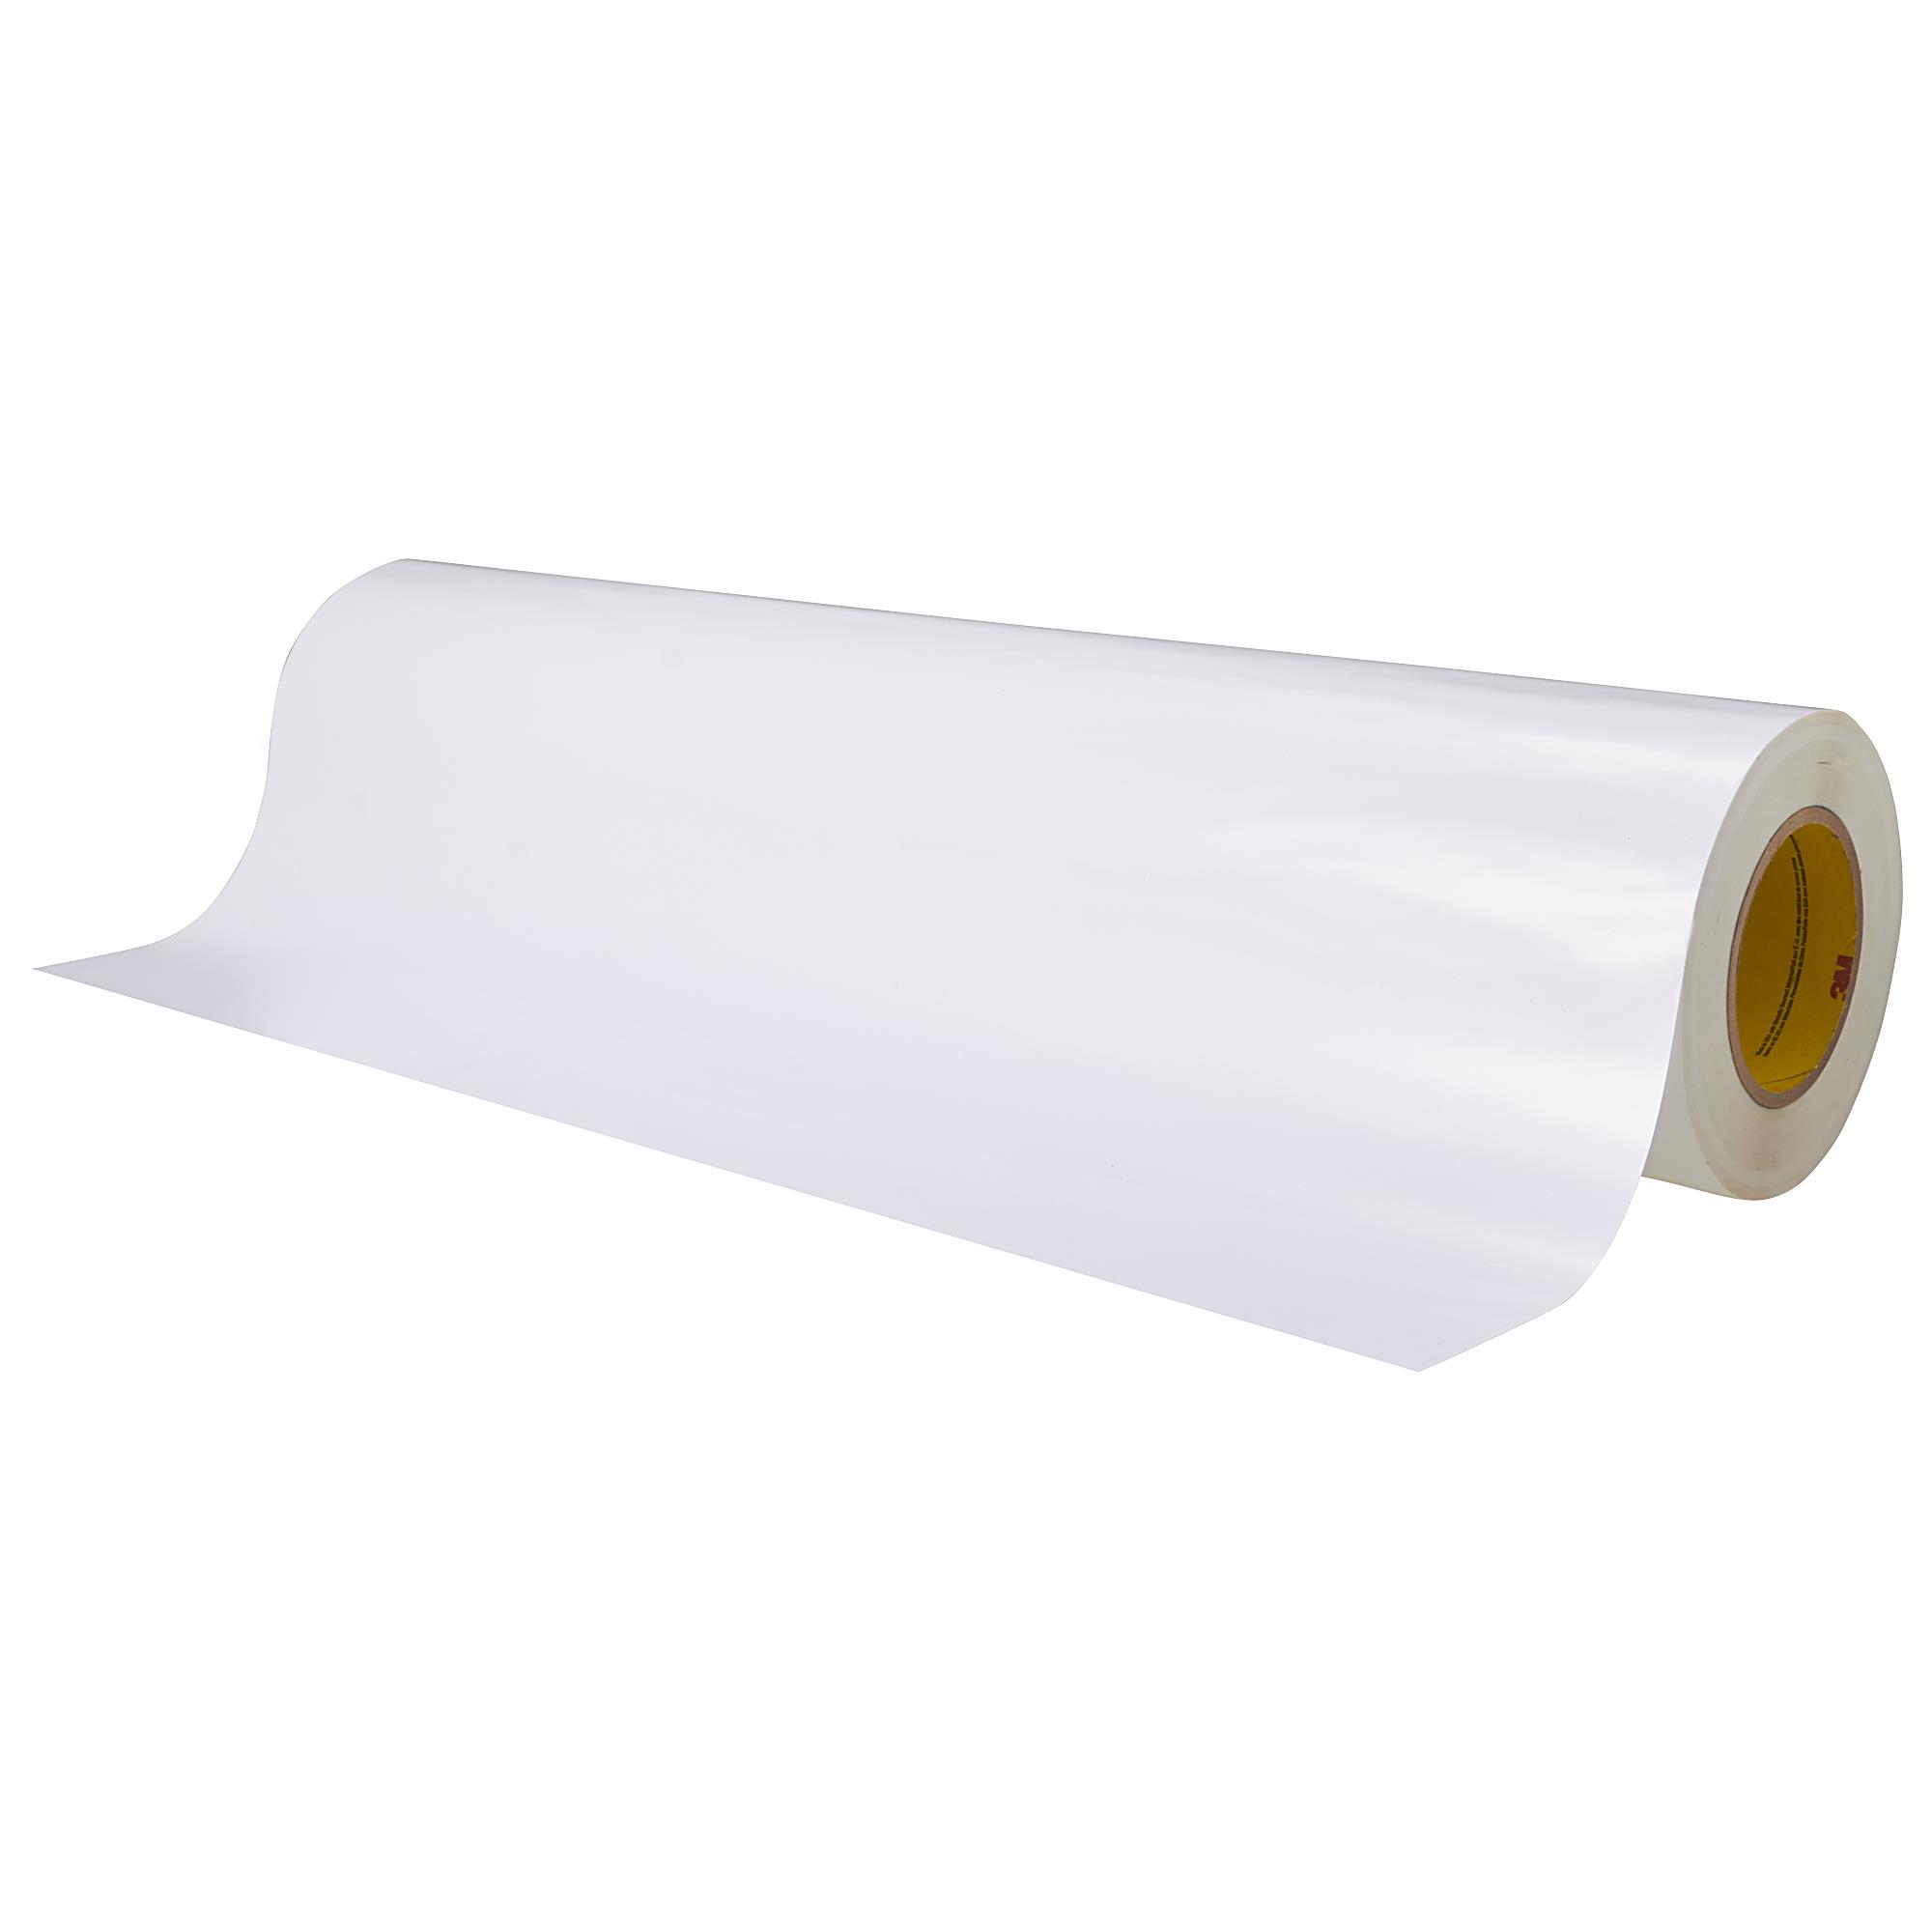 https://www.e-aircraftsupply.com/ItemImages/12/7010302212_3M_Double_Coated_Tape_96042_Clear.jpg